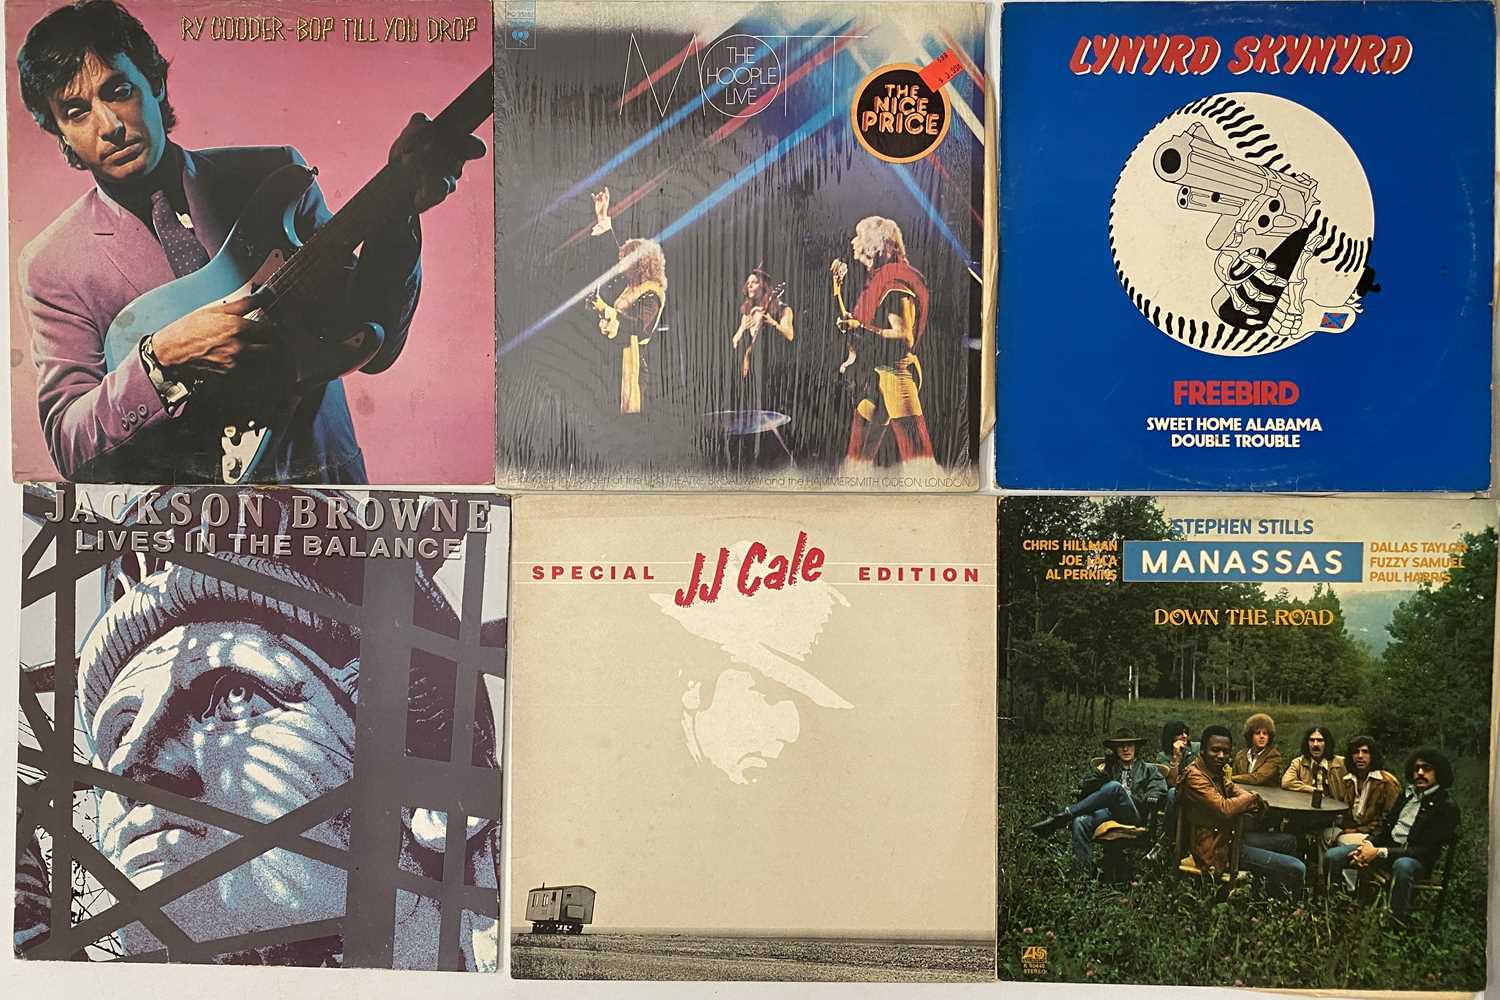 CLASSIC/ POP/ COUNTRY/ AOR - ROCK LP COLLECTION - Image 5 of 6